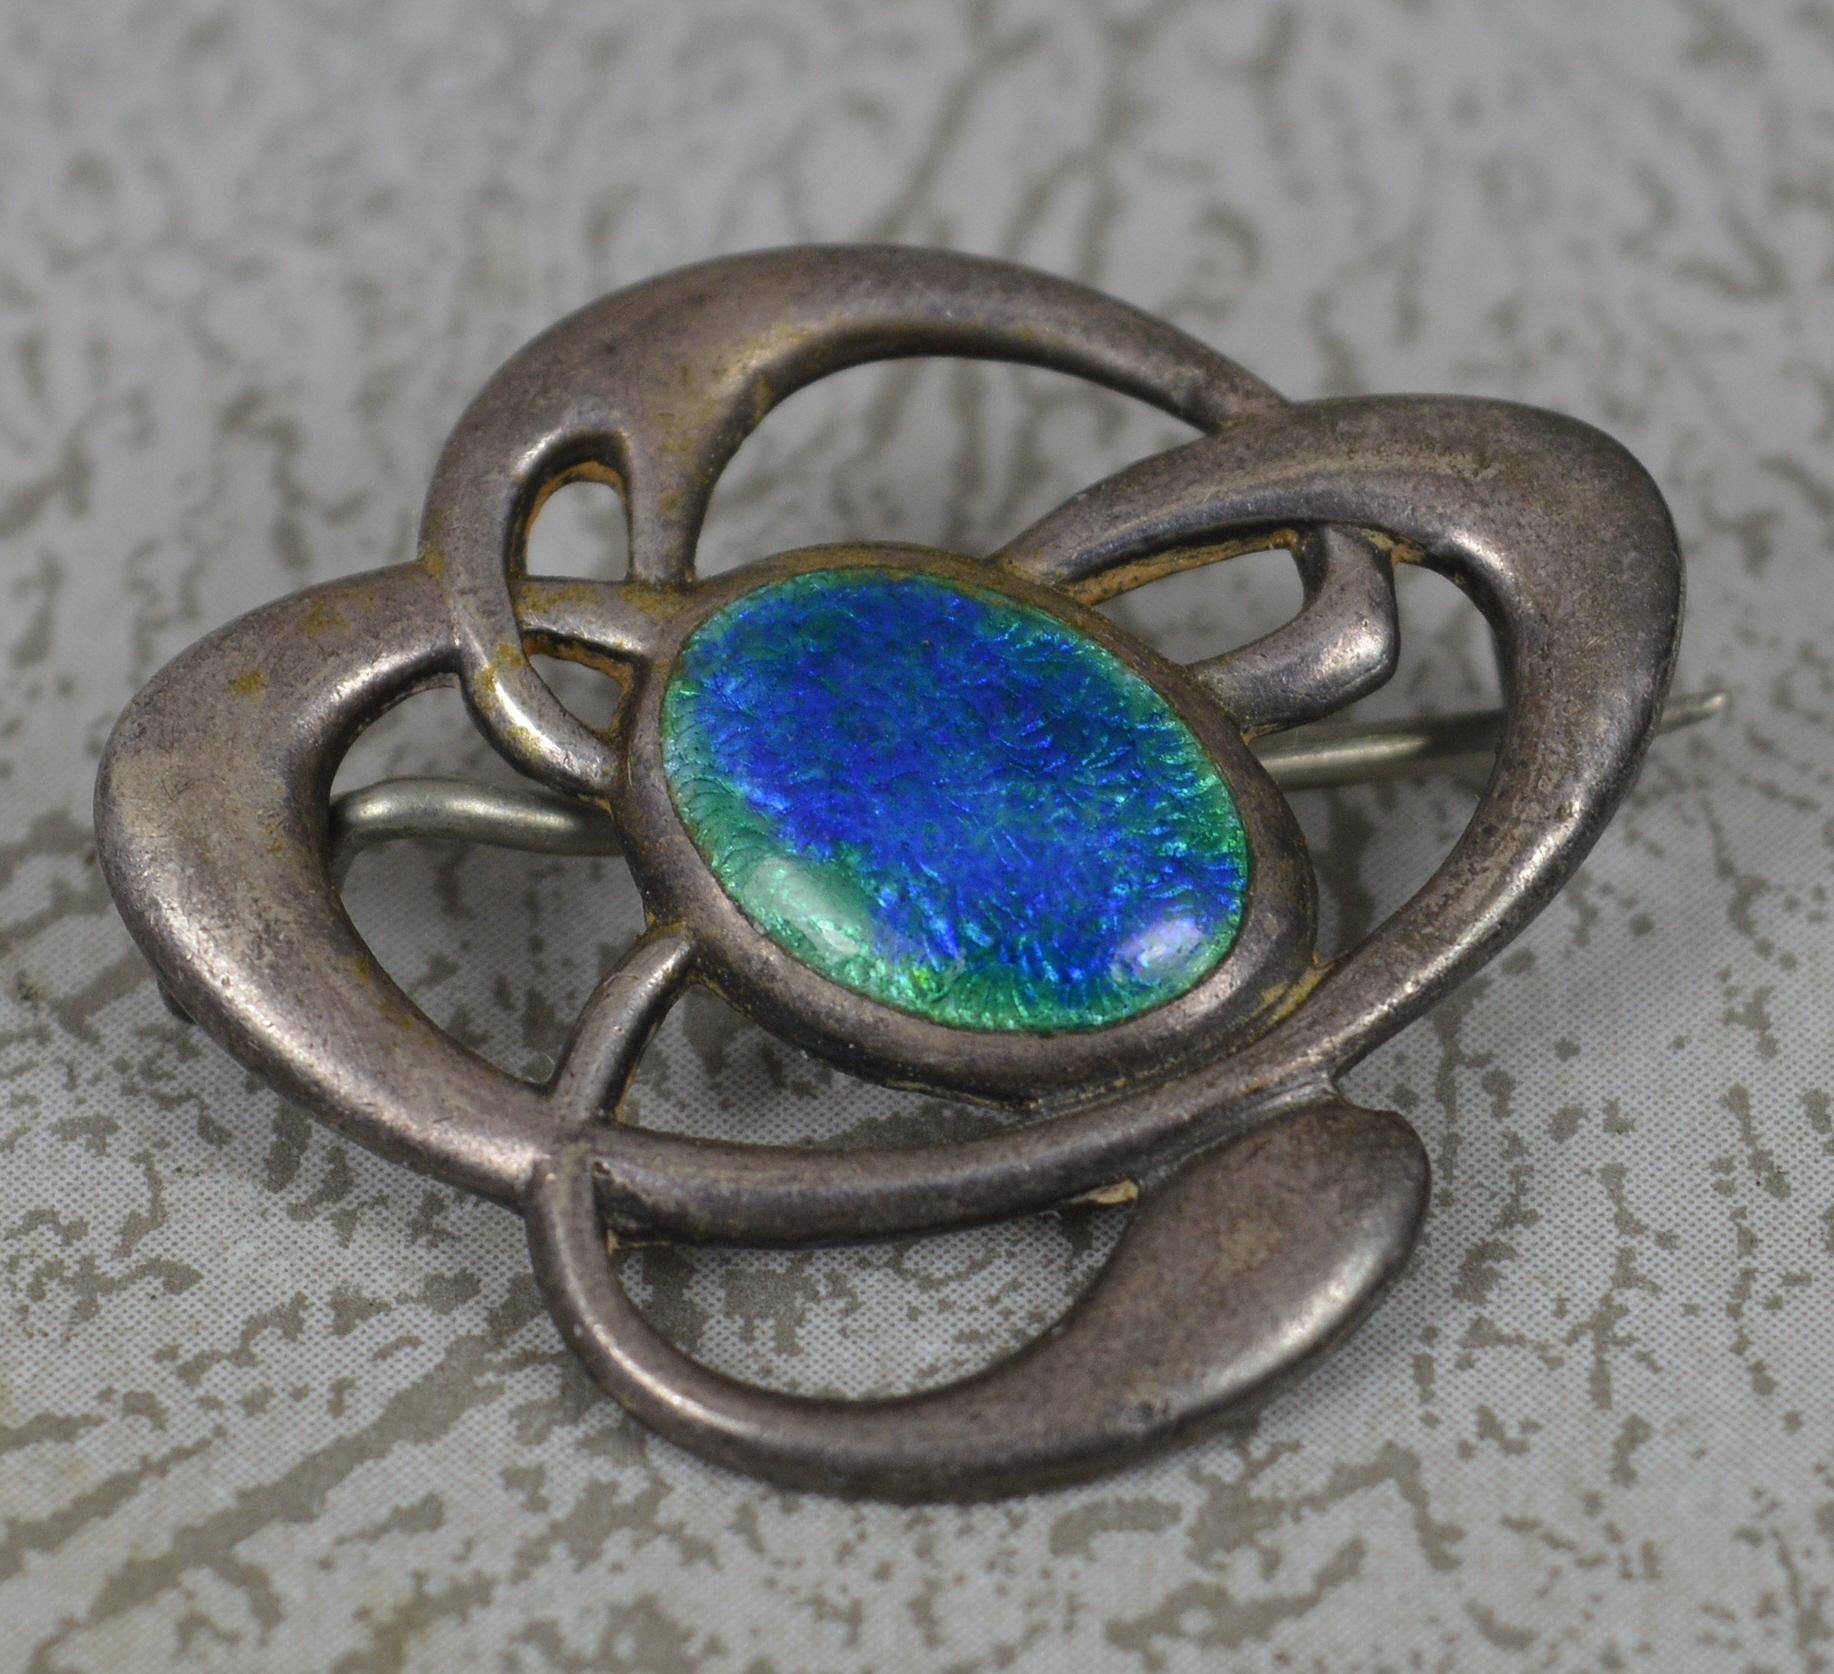 A superb Edwardian period brooch.
Modelled in 925 sterling silver with large panel of the most iridescent blue/green enamelling.
4.0 grams.

Hallmarks ; full marks to reverse
Size ; 27mm x 23mm approx
Condition ; Very good for age. Crisp pattern and